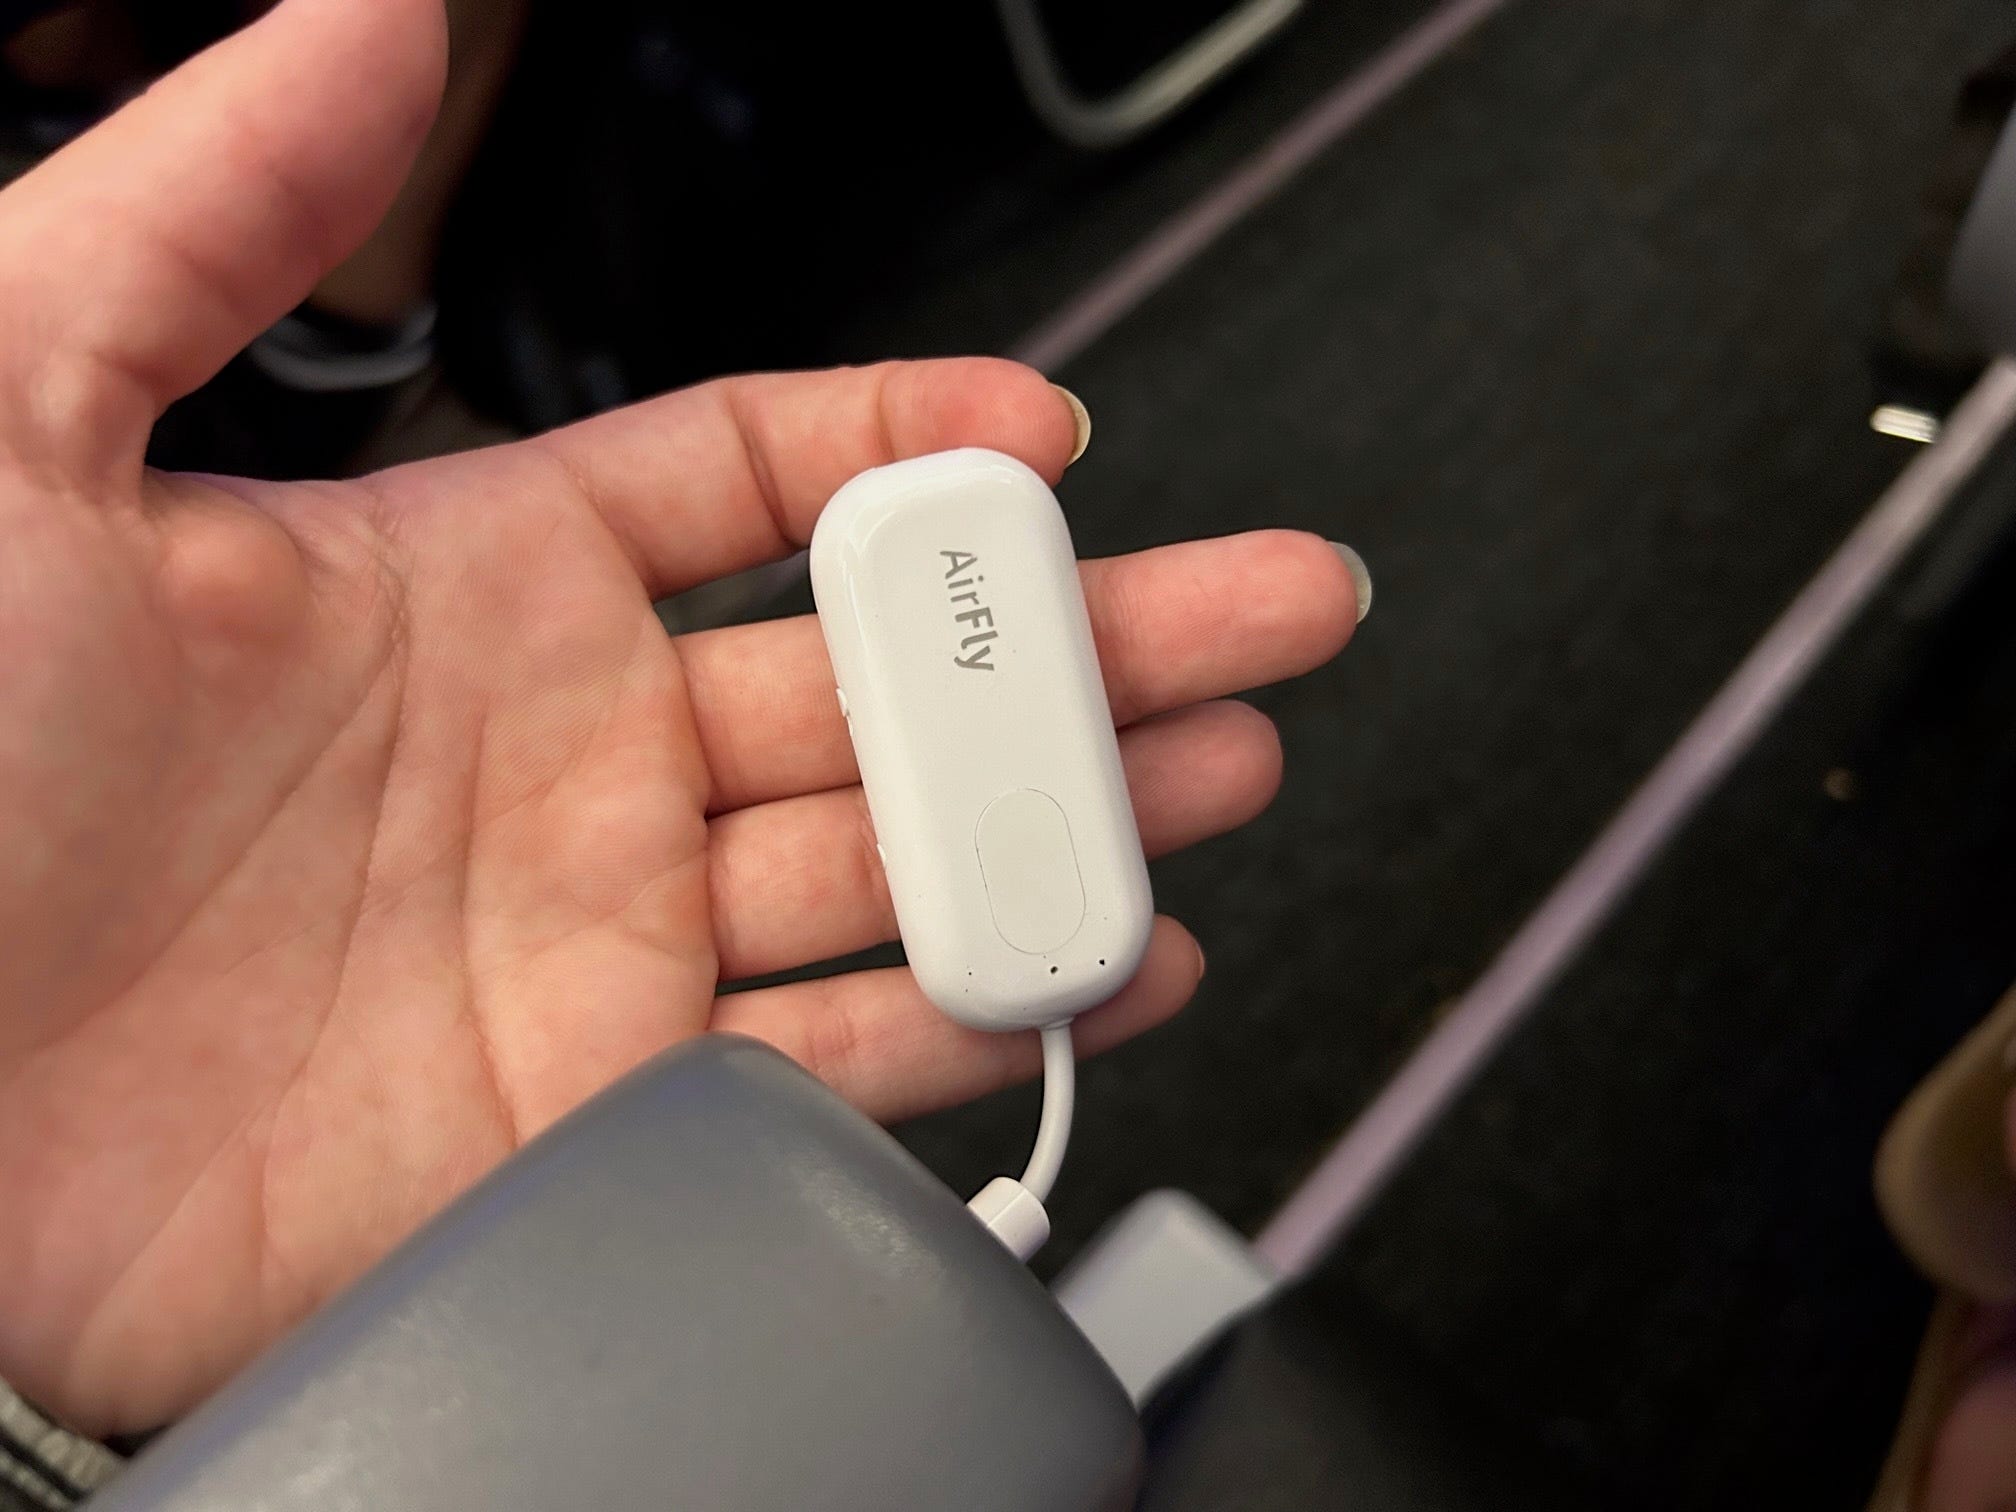 <p>If you've ever forgotten to bring a pair of wired headphones on a flight, you'll know how much of a pain it is to be stuck with the cheap airline ones.</p><p>Konstantinides' nifty solution is the easy-to-use <a href="https://affiliate.insider.com/?amazonTrackingID=null&disabled=false&h=2d2769ef28ce251178d185f583cb784148ce216ded5f70167597f8f1d207a909&platform=browser&platform=msn_reviews&postID=64b89833b39f501cfebccf0f&sc=false&site=in&u=https%3A%2F%2Fwww.twelvesouth.com%2Fproducts%2Fairfly%3Futm_source%3Dgoogle-ads%26utm_campaign%3D%257BAirfly%257D%26utm_agid%3D147672451140%26utm_term%3Dtwelve%2Bsouth%2Bairfly%2Bpro%26creative%3D650918045753%26device%3Dc%26placement%3D%26tw_source%3Dgoogle%26tw_adid%3D650918045753%26tw_campaign%3D19800395182%26gclid%3DCjwKCAjwtuOlBhBREiwA7agf1kujAVx0HZN26s1EFgcEku_ClC7XoZ6FUhG4Qq5XnqIIuuxSoBSTHhoCawUQAvD_BwE&utm_source=msn_reviews" rel="noopener">AirFly Pro</a>, a Twelve South product that lets you use AirPods or Beats wireless headphones for in-flight entertainment. </p><p>What's more, her favorite aspect of the gadget is that it can pair two sets of AirPods so two people can listen to the same movie or show at the same time.</p><p><a href="https://www.insider.com/best-gadget-for-in-flight-entertainment-2023-7">Read more.</a></p>